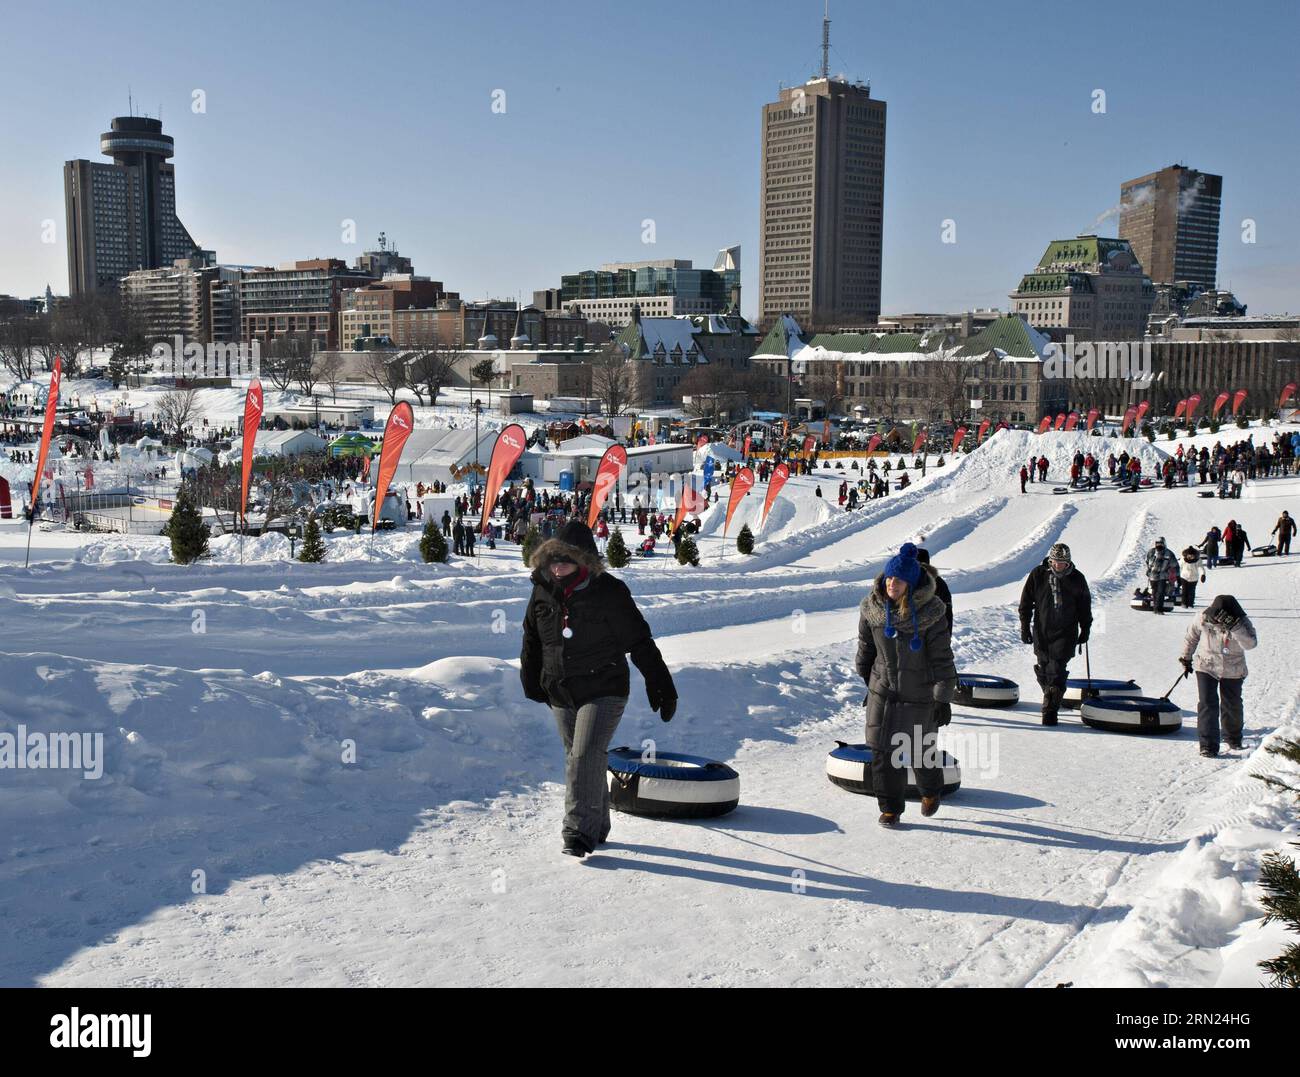 (150207) -- QUEBEC CITY, Feb. 7, 2015 -- People enjoy themselves during the Quebec Winter Carnival in Quebec City, Quebec of Canada, Feb. 7, 2015. ) CANADA-QUEBEC-QUEBEC-CITY-WINTER-CARNIVAL AndrewxSoong PUBLICATIONxNOTxINxCHN   Quebec City Feb 7 2015 Celebrities Enjoy themselves during The Quebec Winter Carnival in Quebec City Quebec of Canada Feb 7 2015 Canada Quebec Quebec City Winter Carnival  PUBLICATIONxNOTxINxCHN Stock Photo